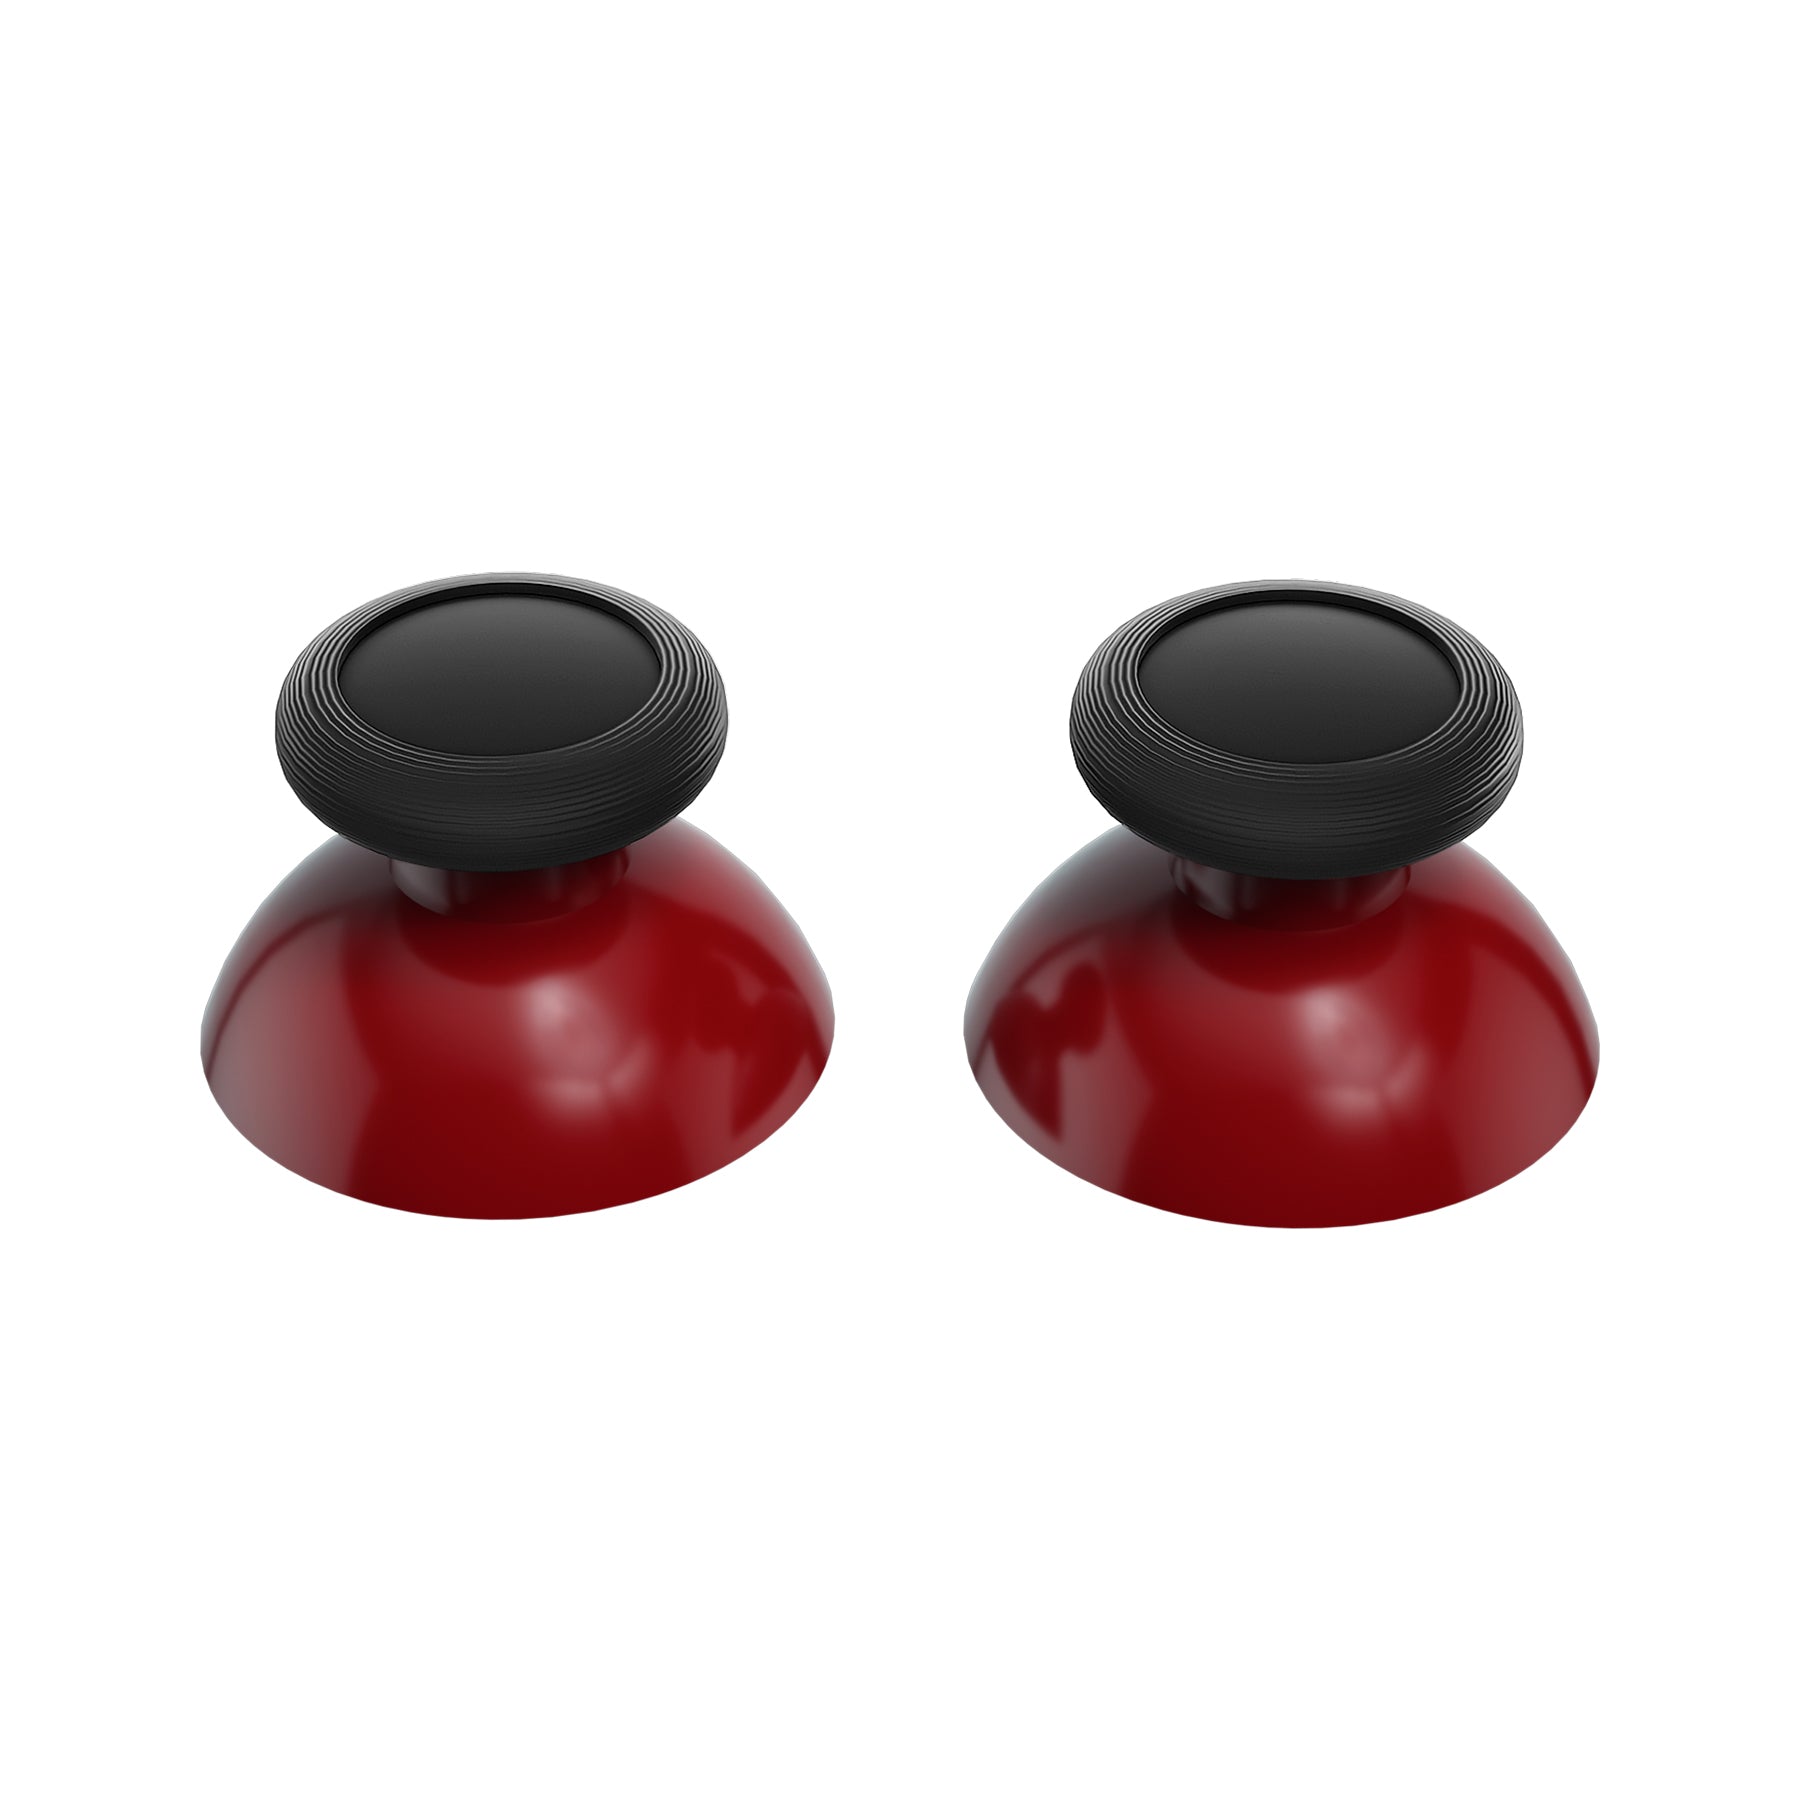 eXtremeRate Retail Carmine Red & Black Replacement 3D Joystick Thumbsticks, Analog Thumb Sticks with Phillips Screwdriver for Nintendo Switch Pro Controller - KRM525